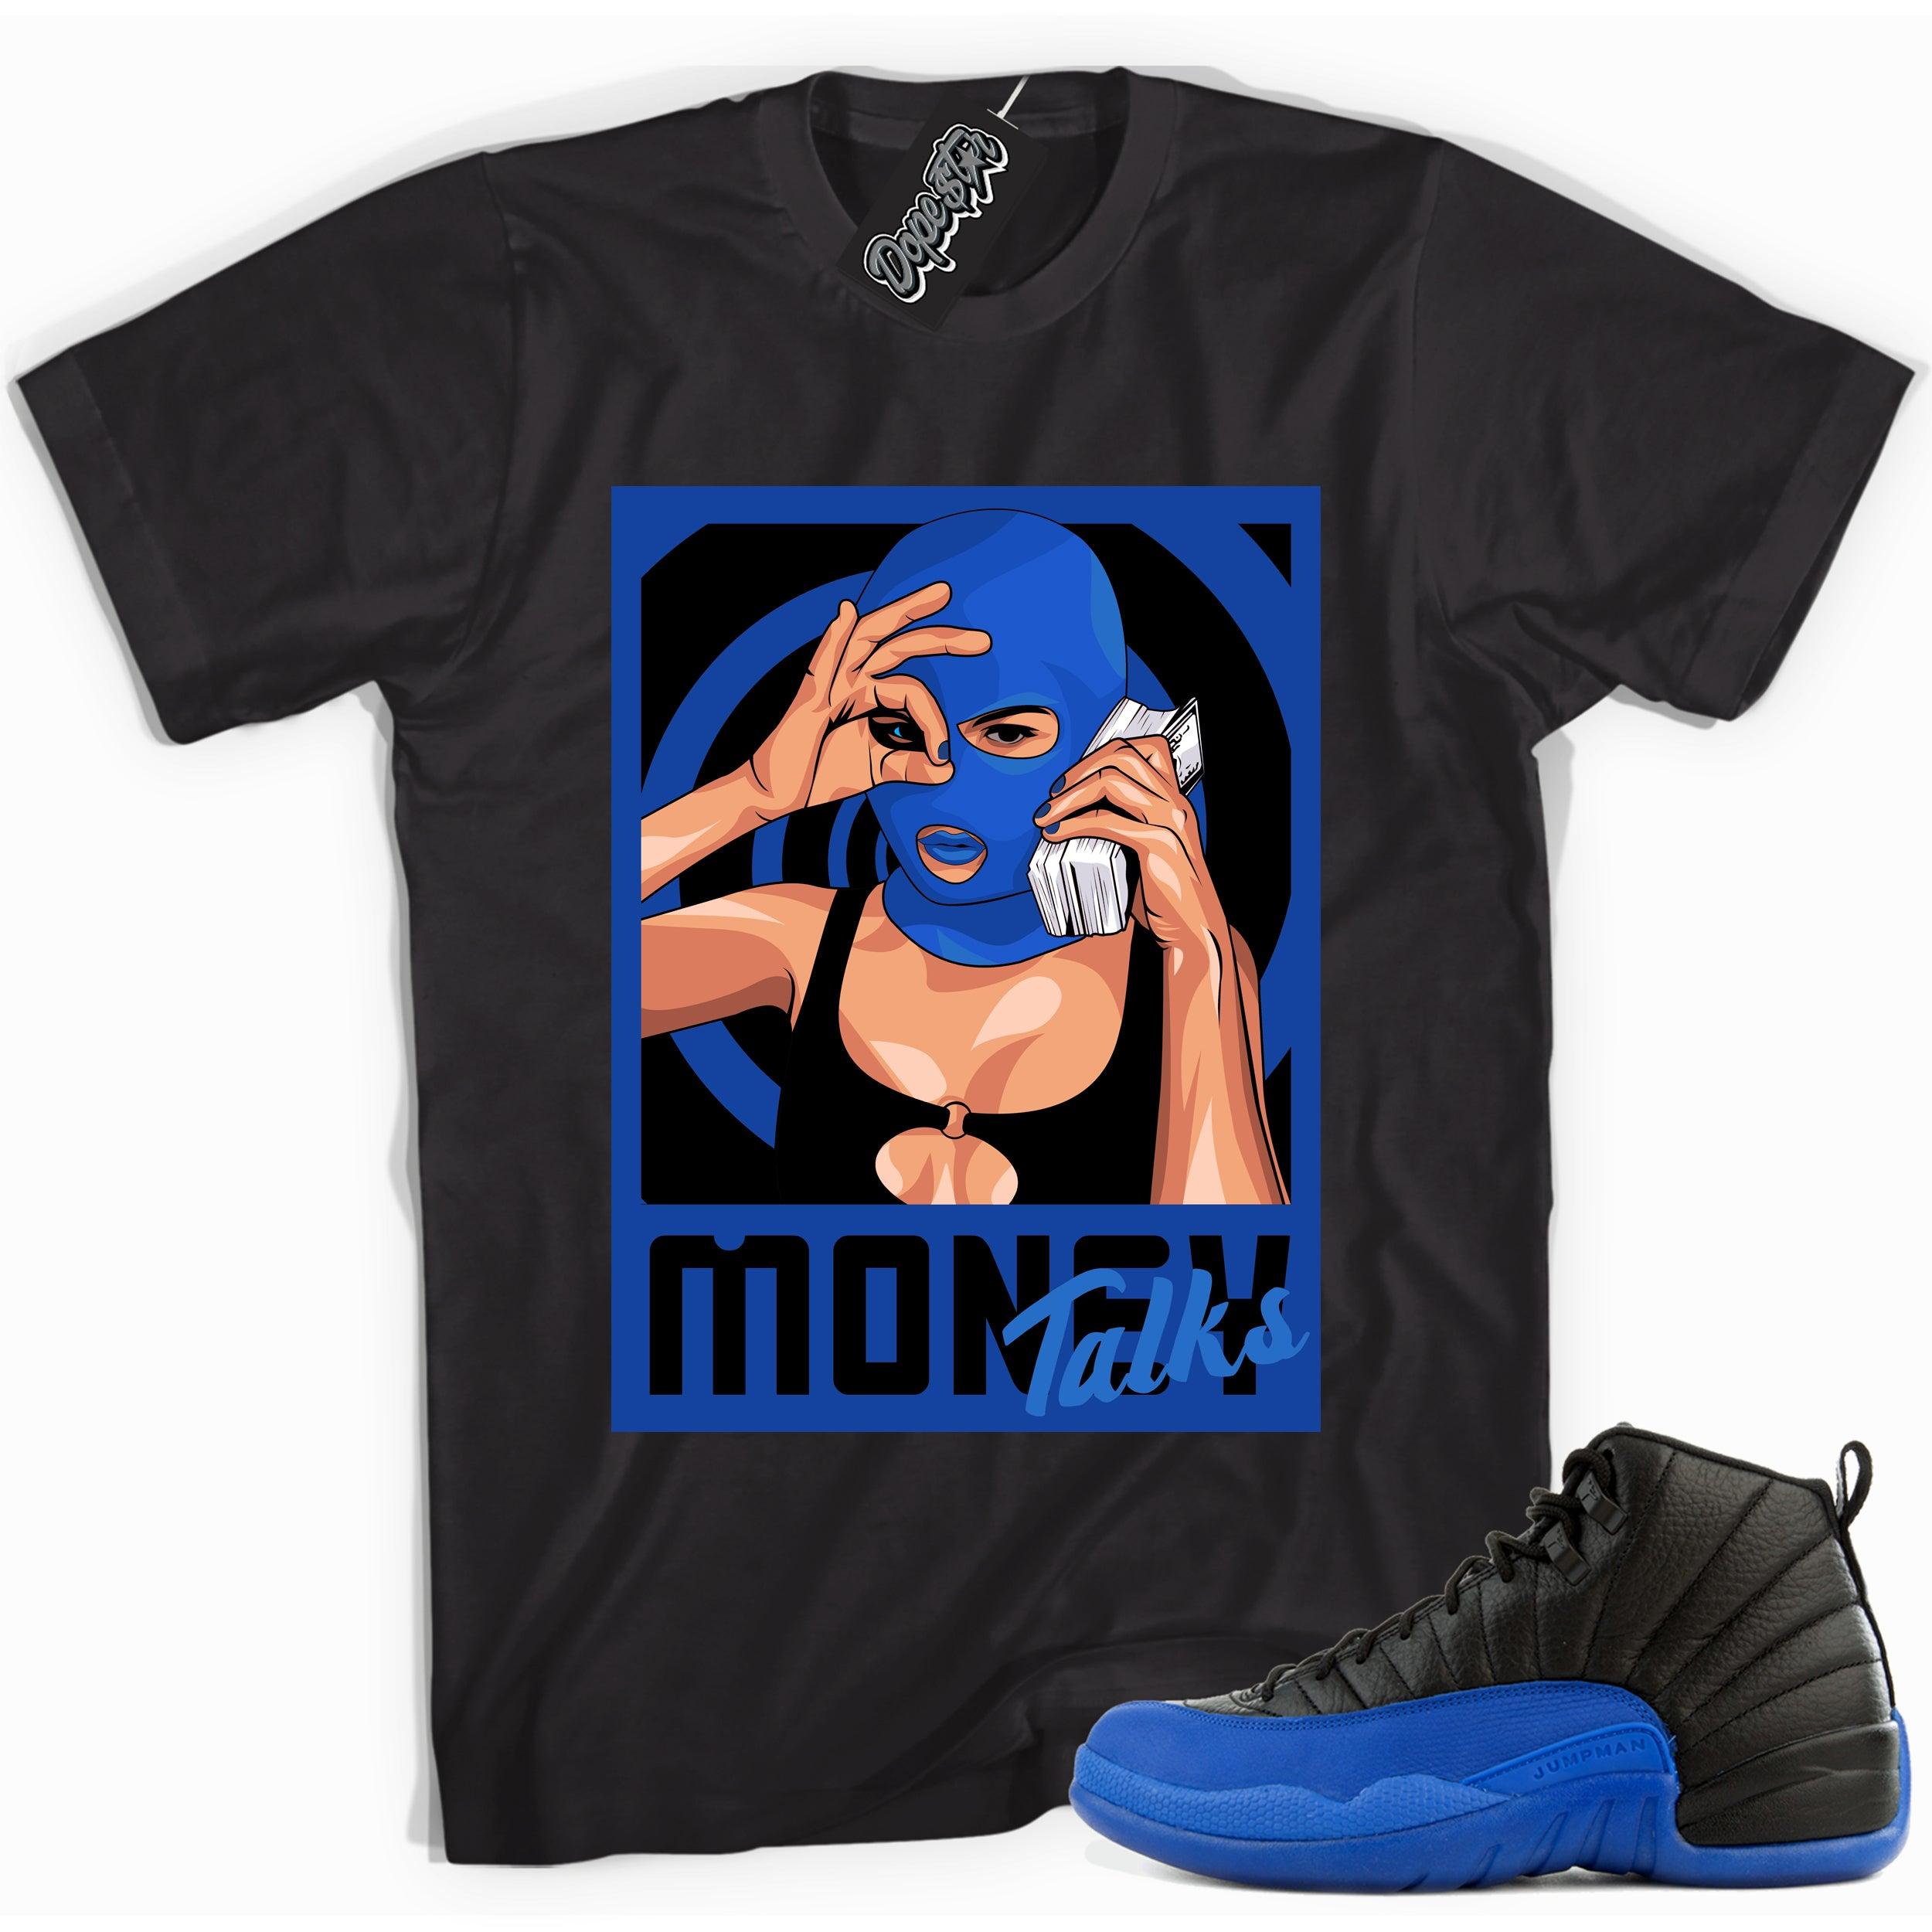 Cool black graphic tee with 'money talks' print, that perfectly matches  Air Jordan 12 Retro Black Game Royal sneakers.